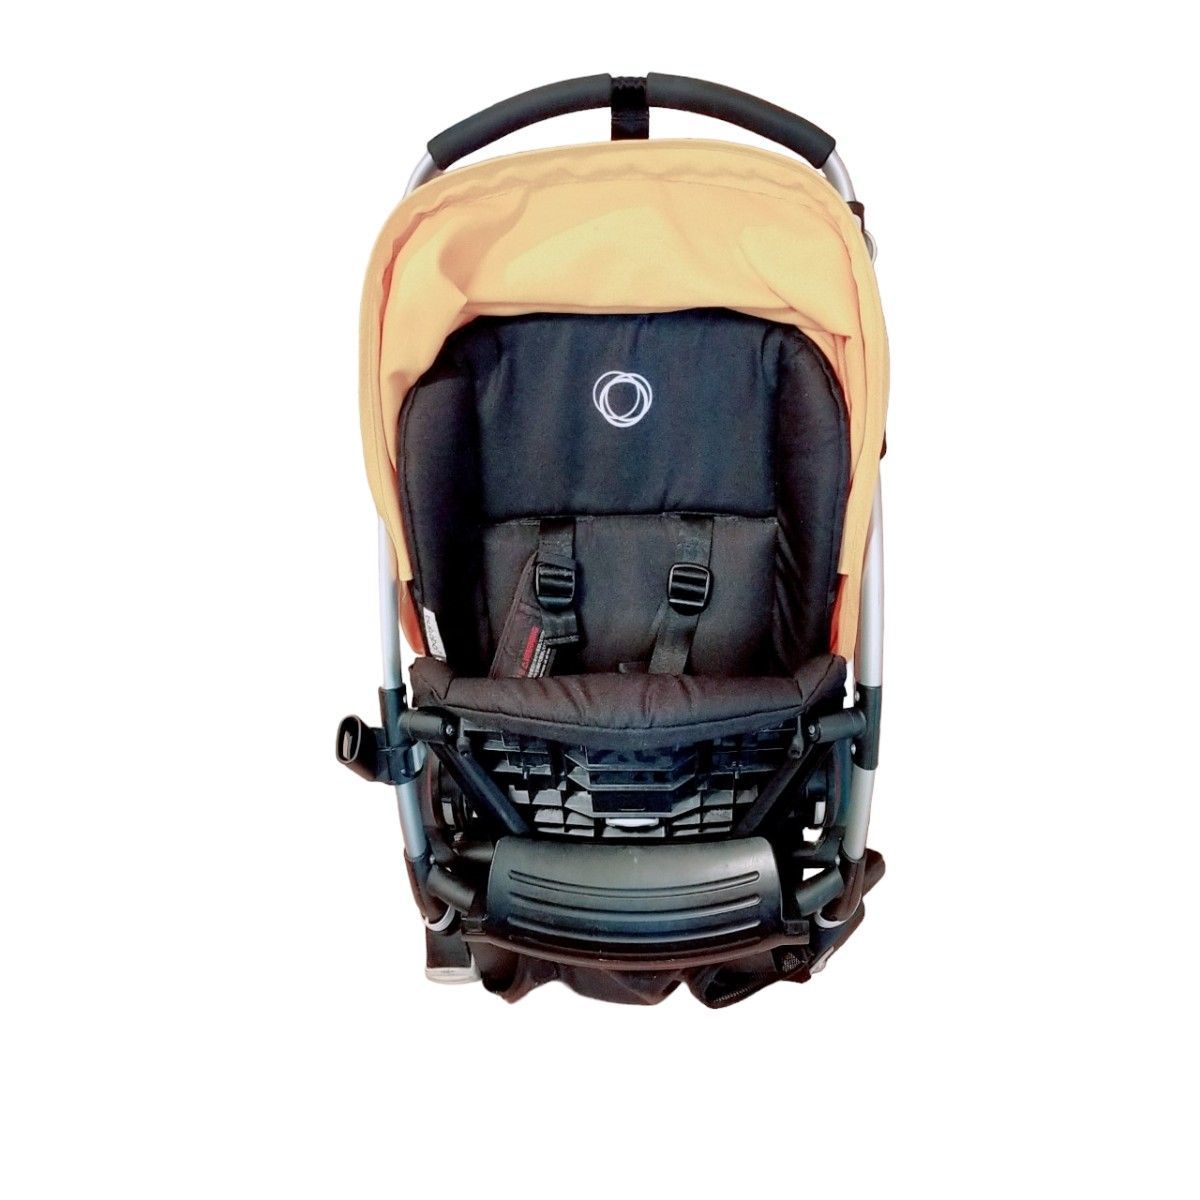  superior article bagab- Be yellow bugaboo bee stroller 